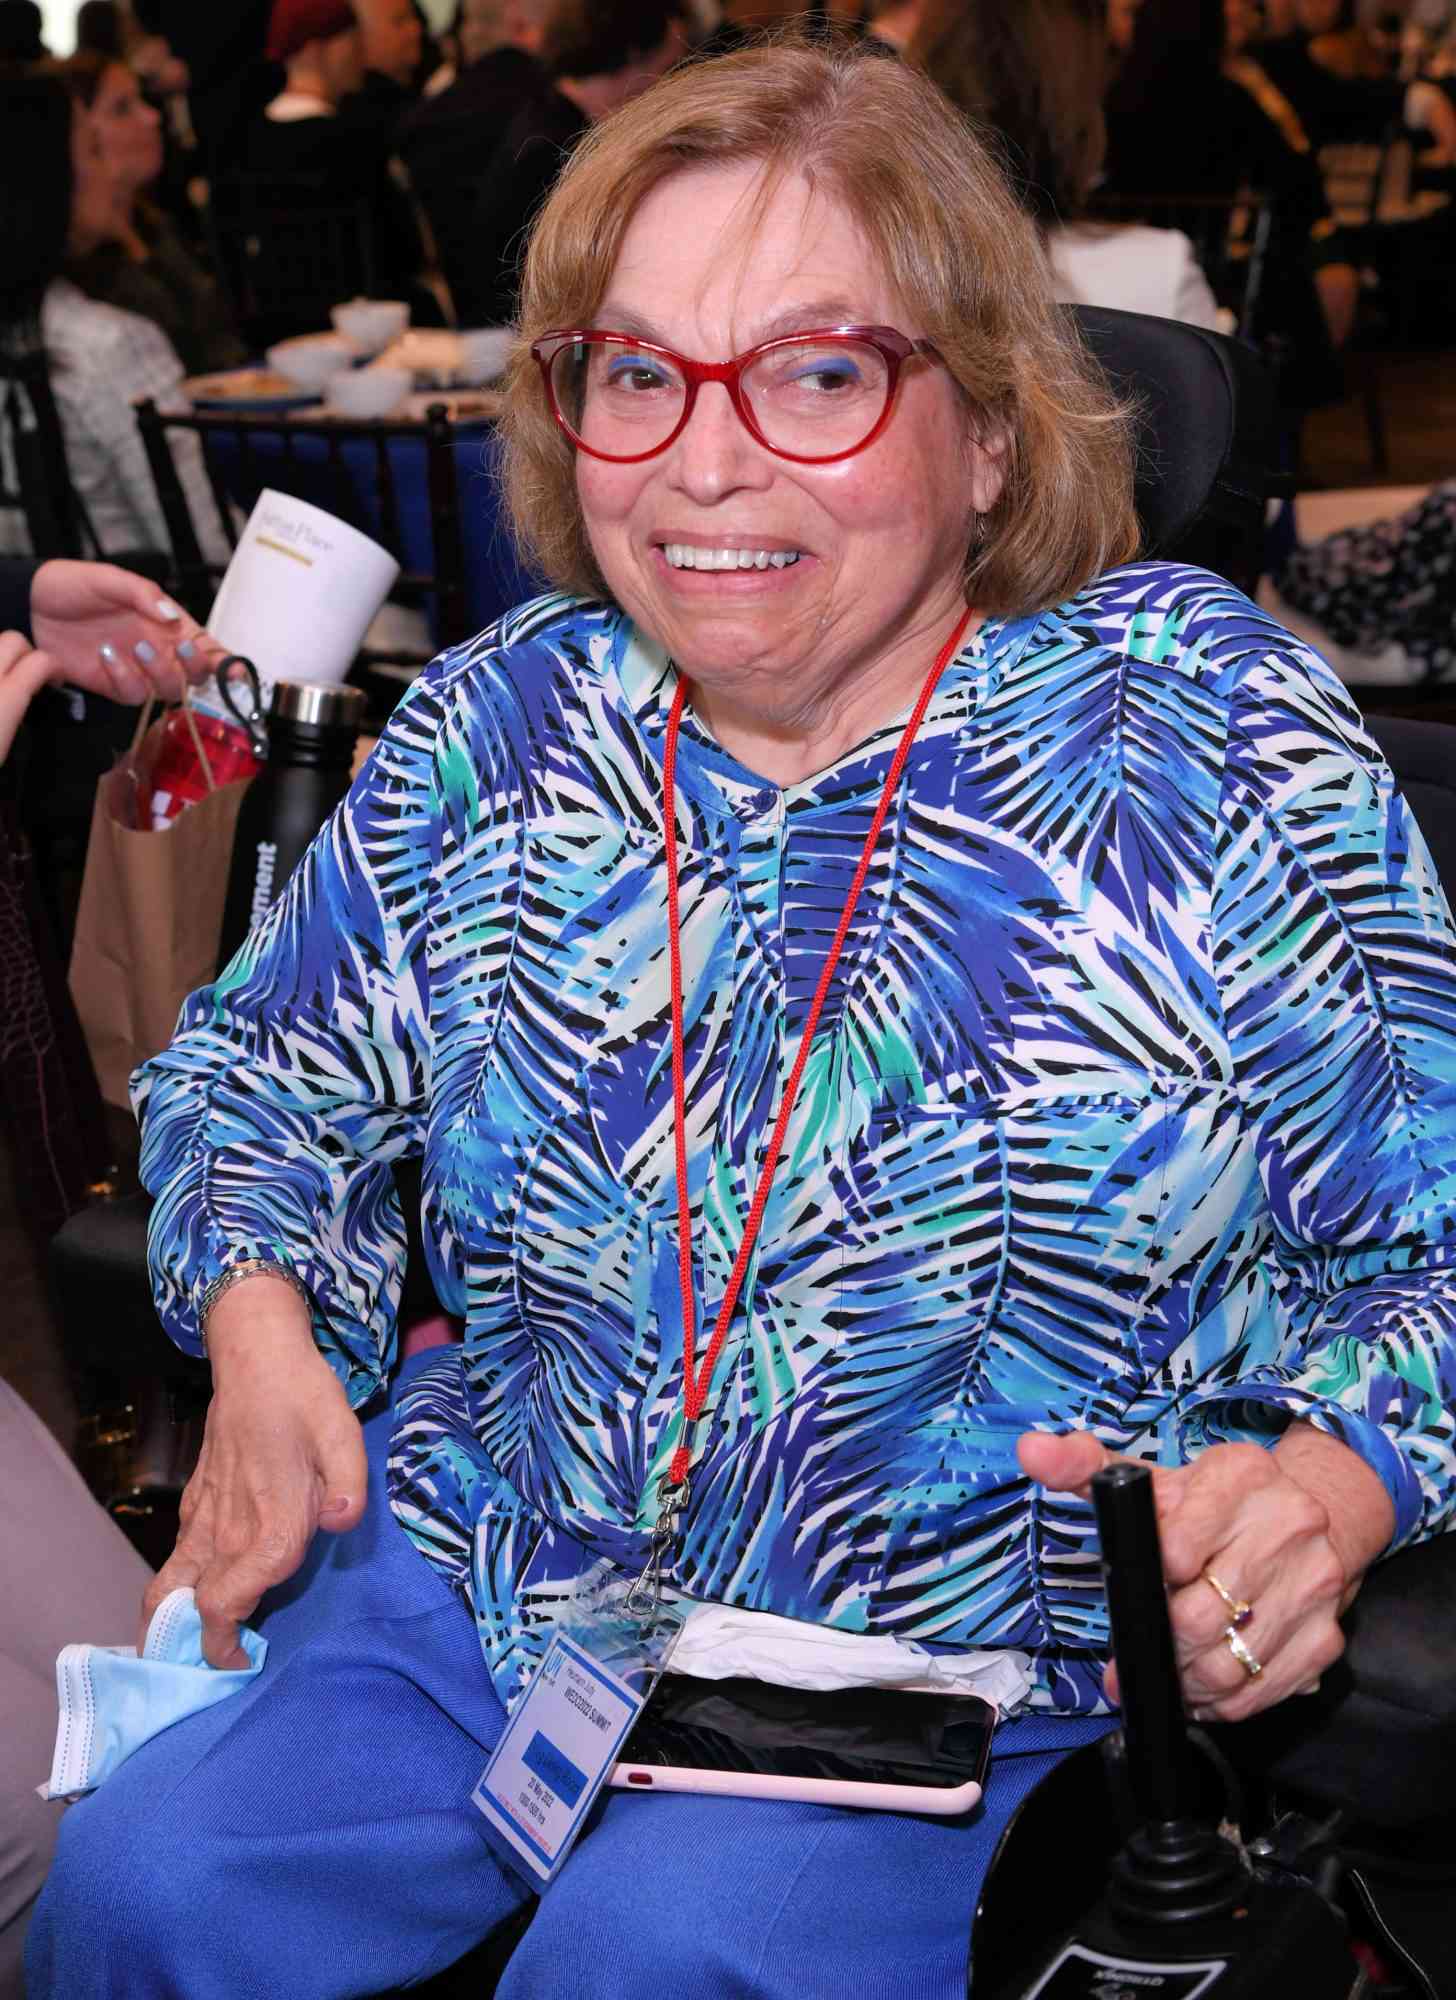 NEW YORK, NEW YORK - MAY 20: Judy Heumann attends the 2022 Women's Entrepreneurship Day Organization Summit at United Nations on May 20, 2022 in New York City. (Photo by Chance Yeh/Getty Images)